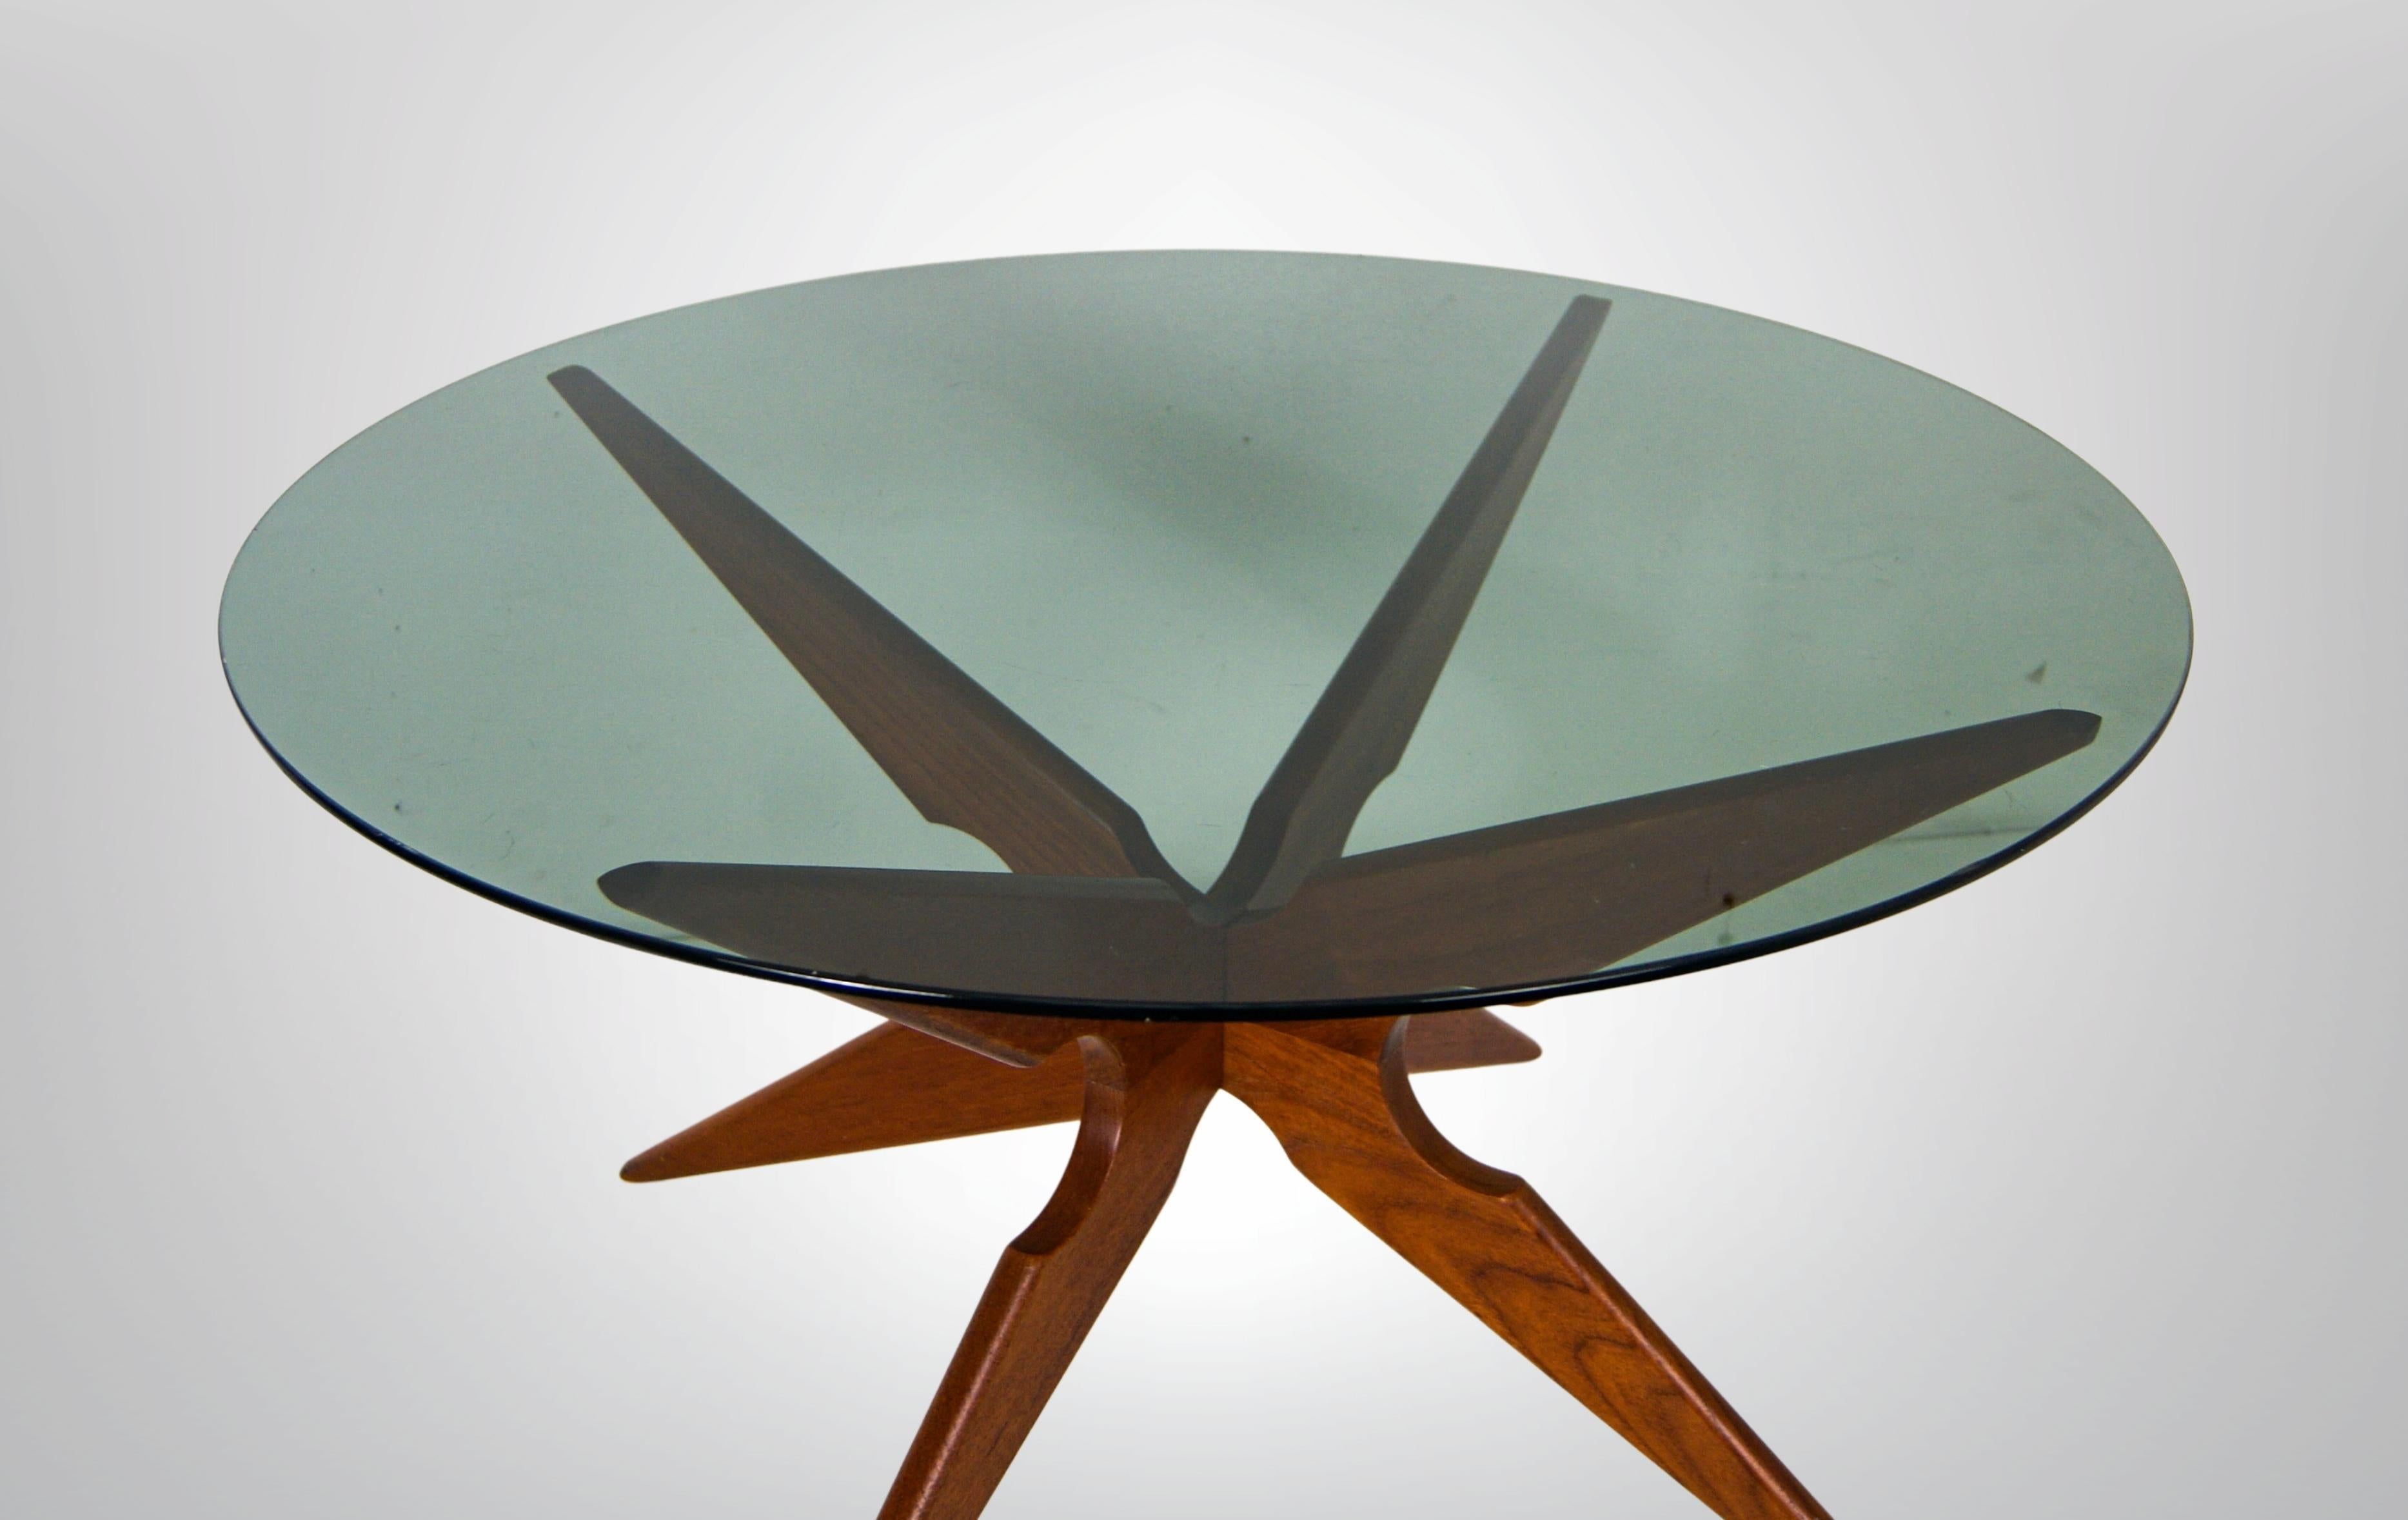 Danish Mid-Century Sika Mobler Denmark Teak and Smoked Glass Coffee Table 1960s For Sale